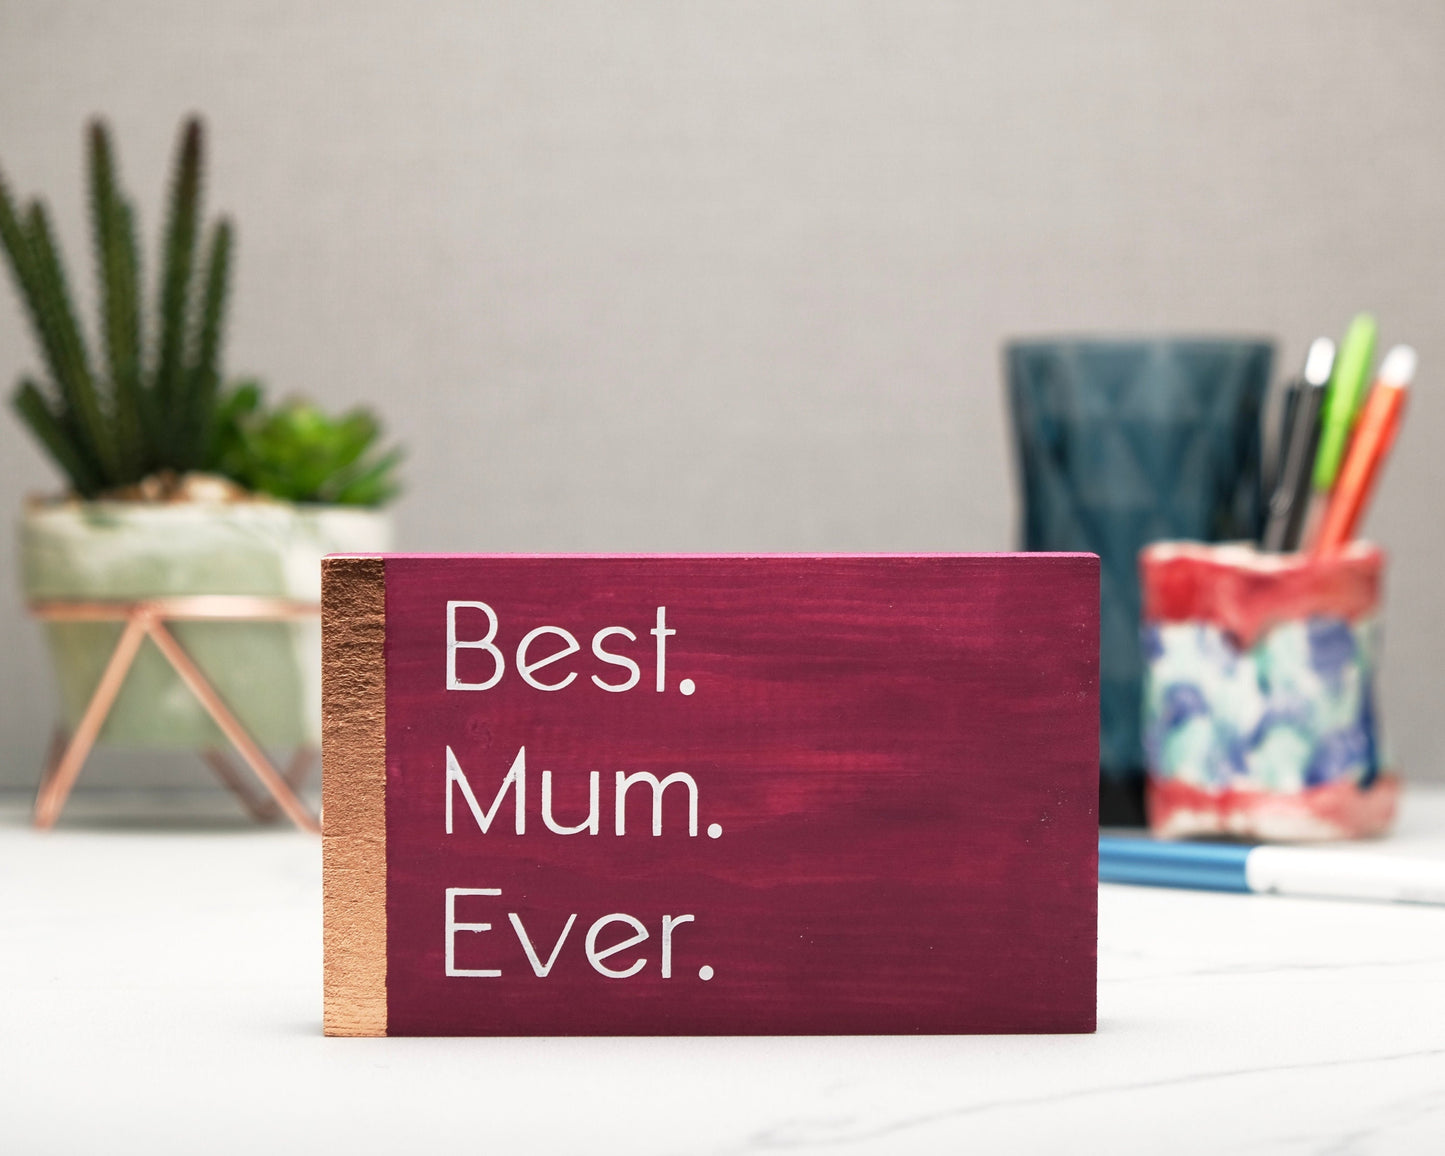 Small freestanding rectangular wooden sign facing straight on. Magenta color, bronze rose gold vertical border on left side. White painted quote in thin font, Best. Mum. Ever. Plant and pen pot out of focus in background.